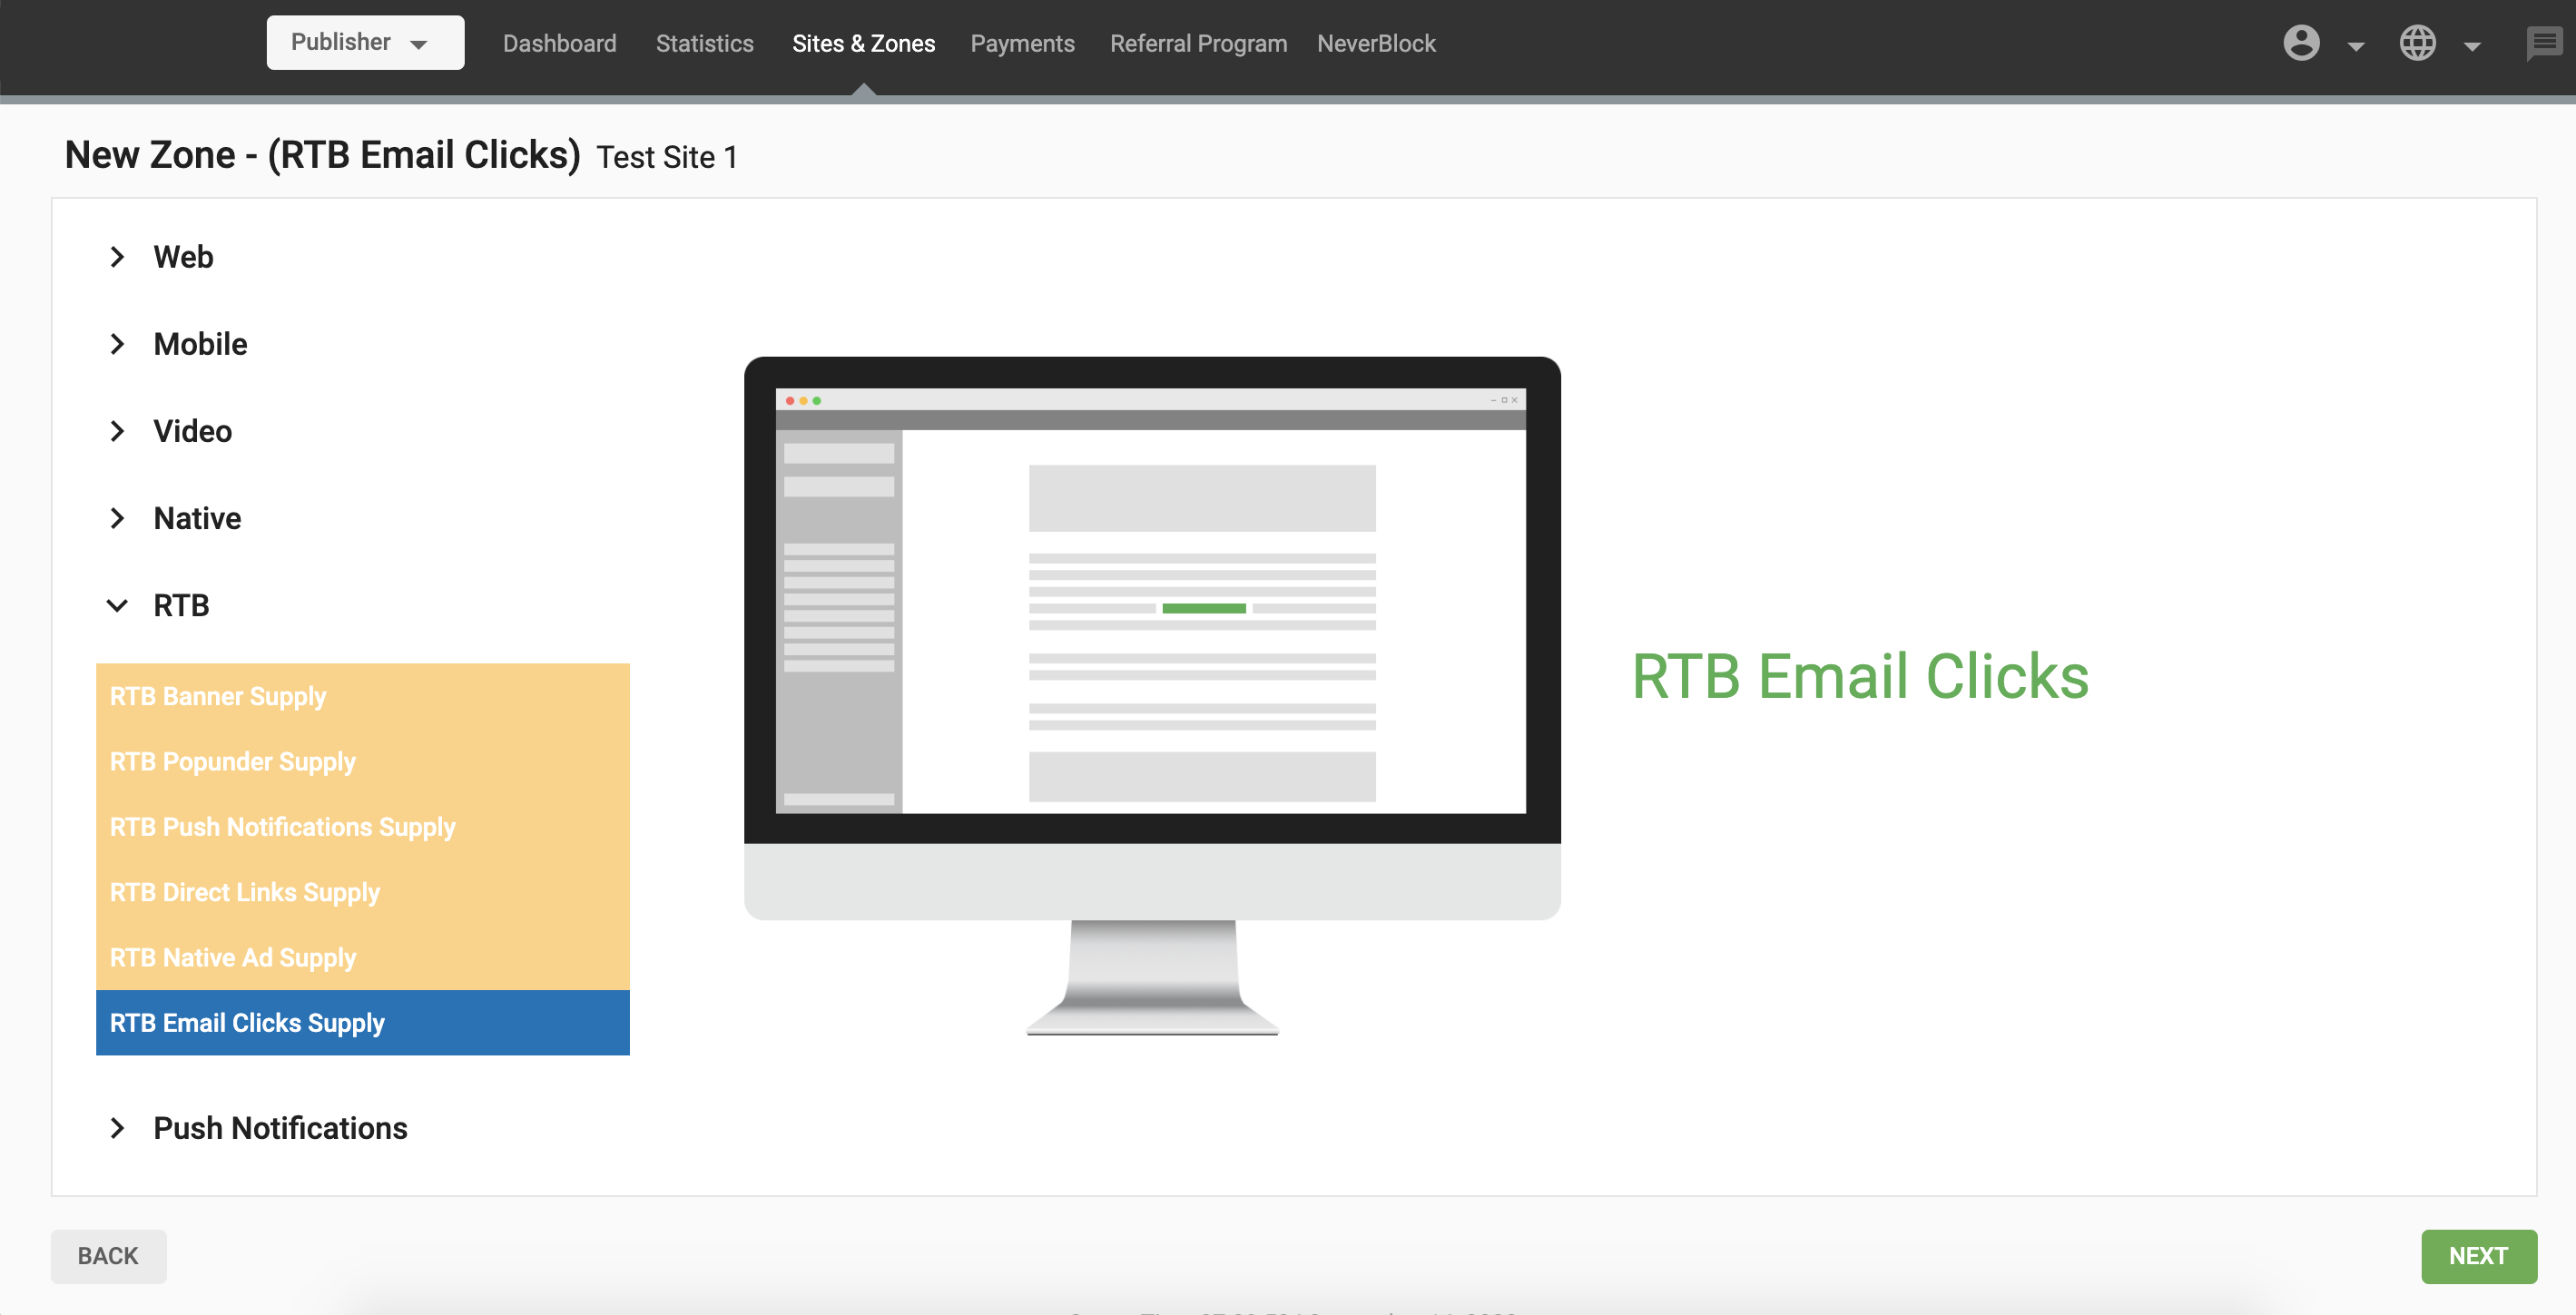 RTB Email Clicks